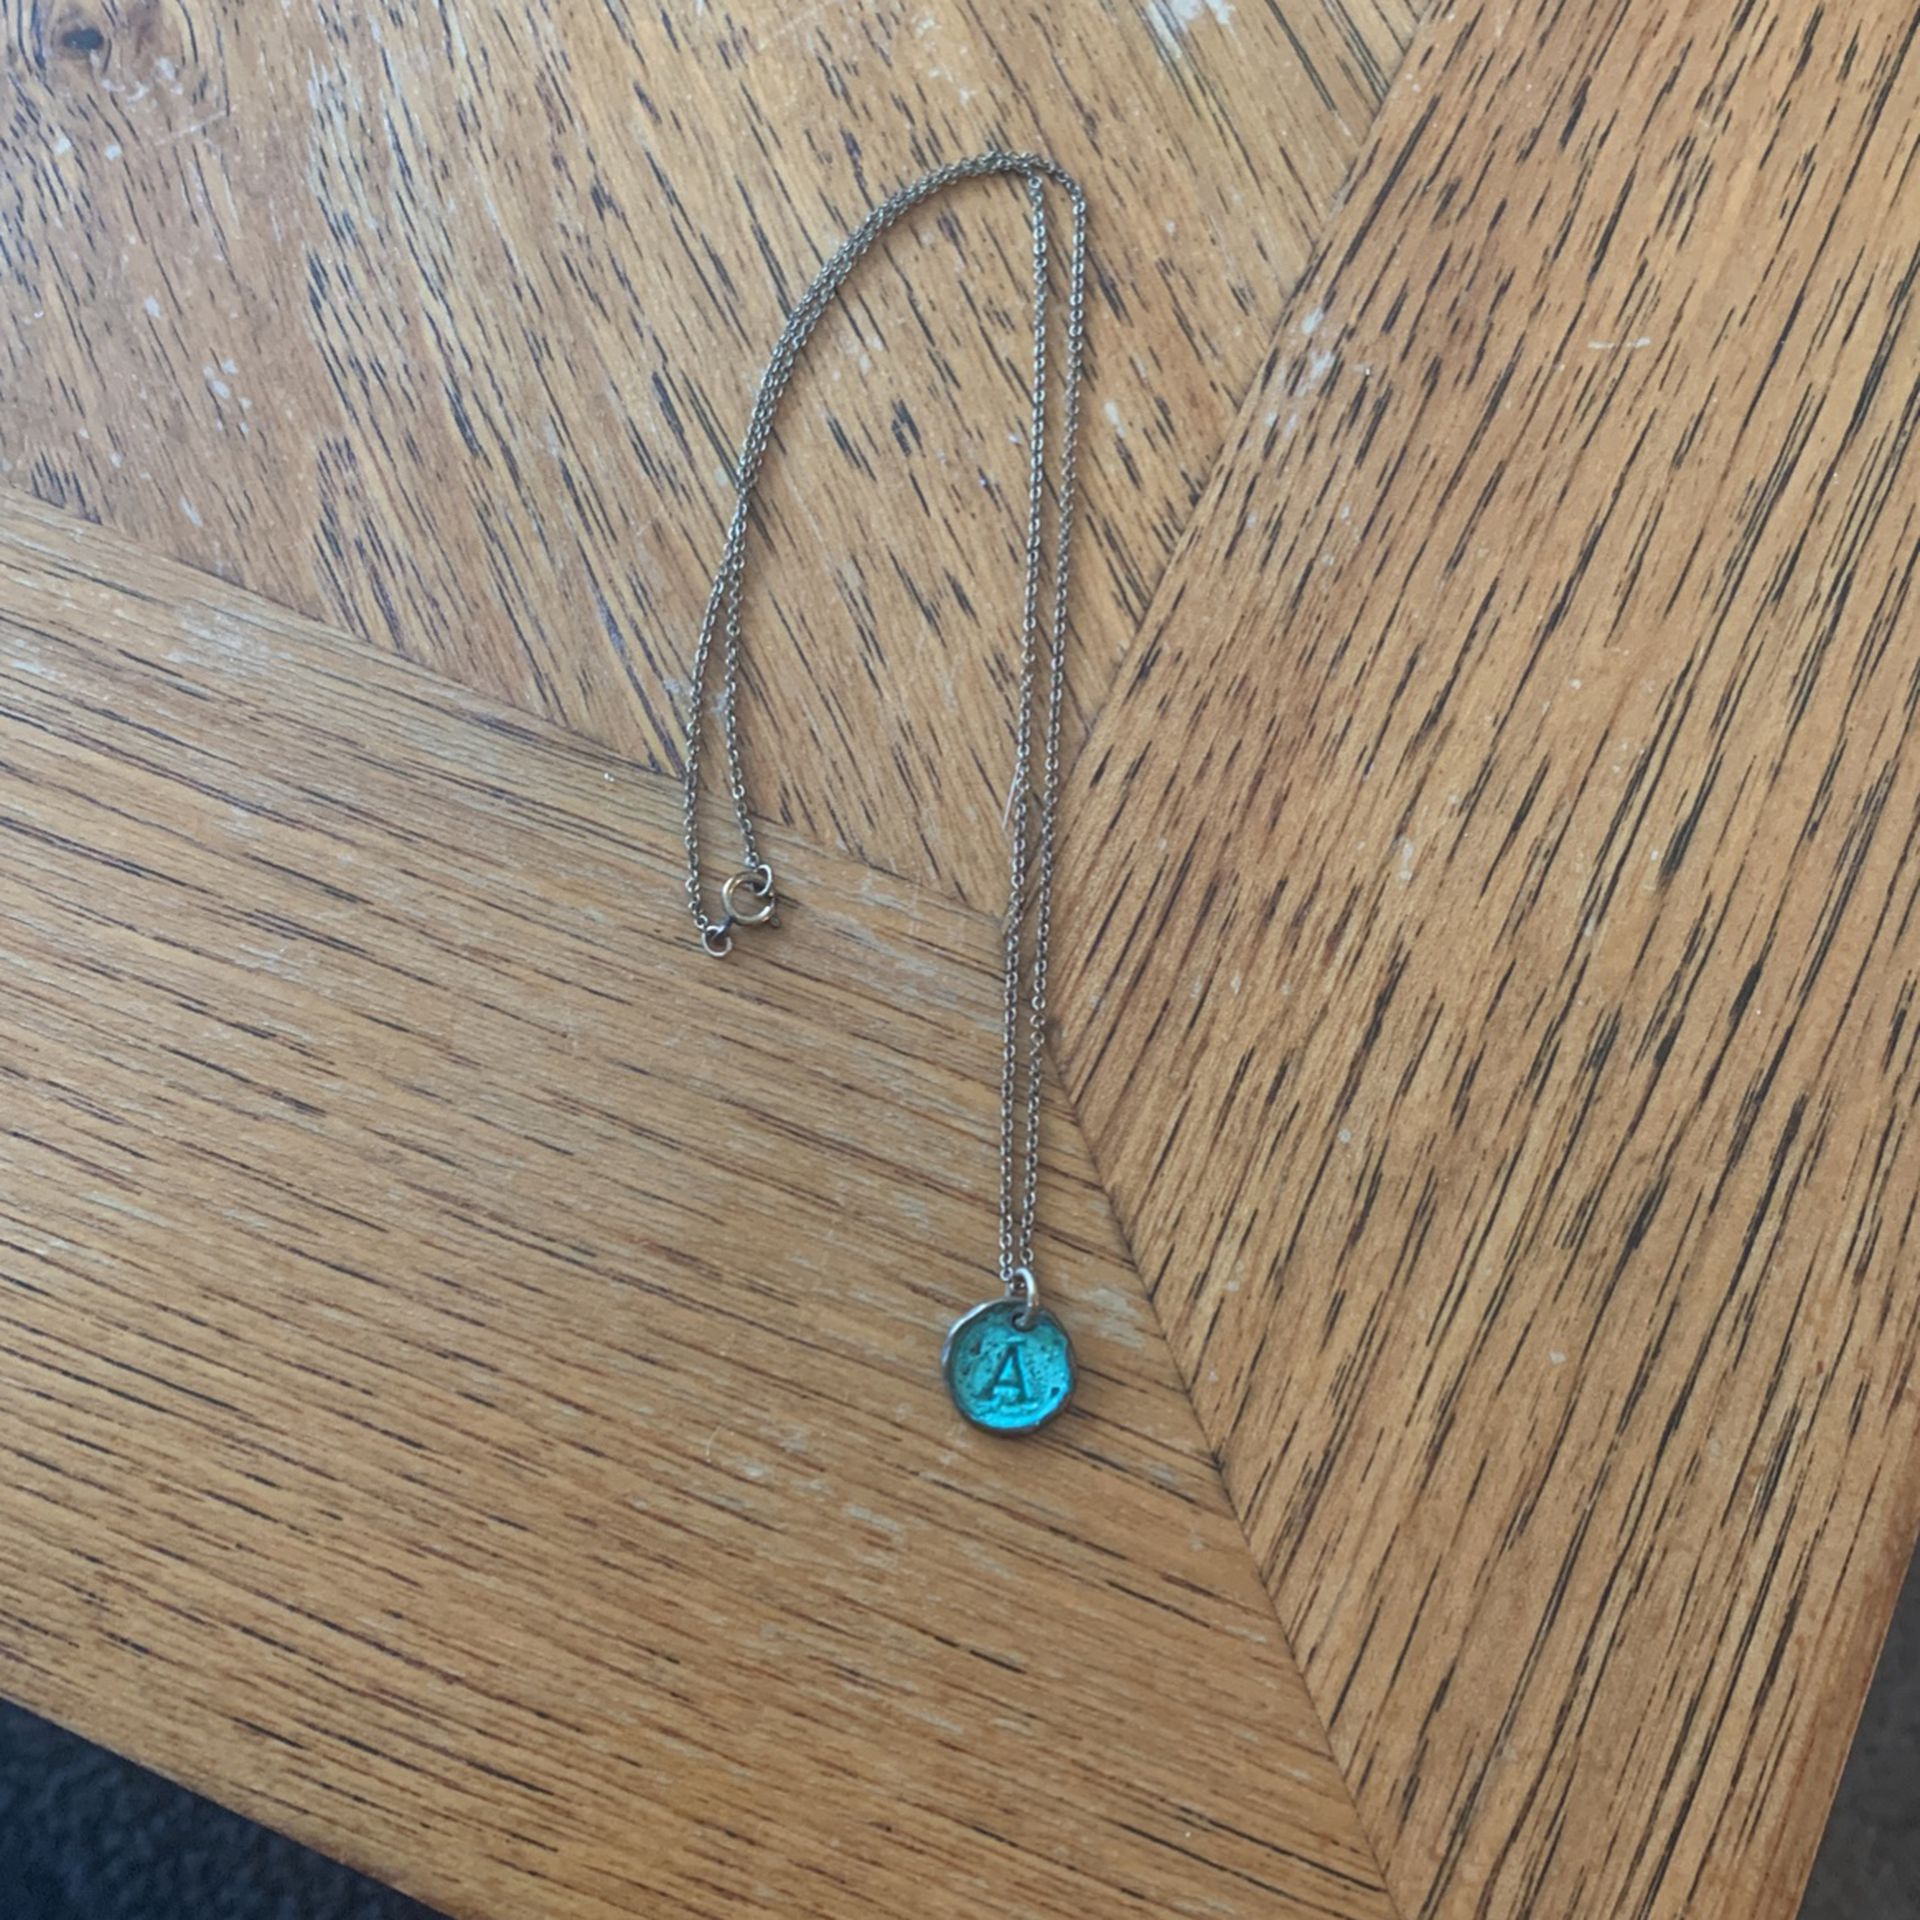 Turquoise “A” Necklace